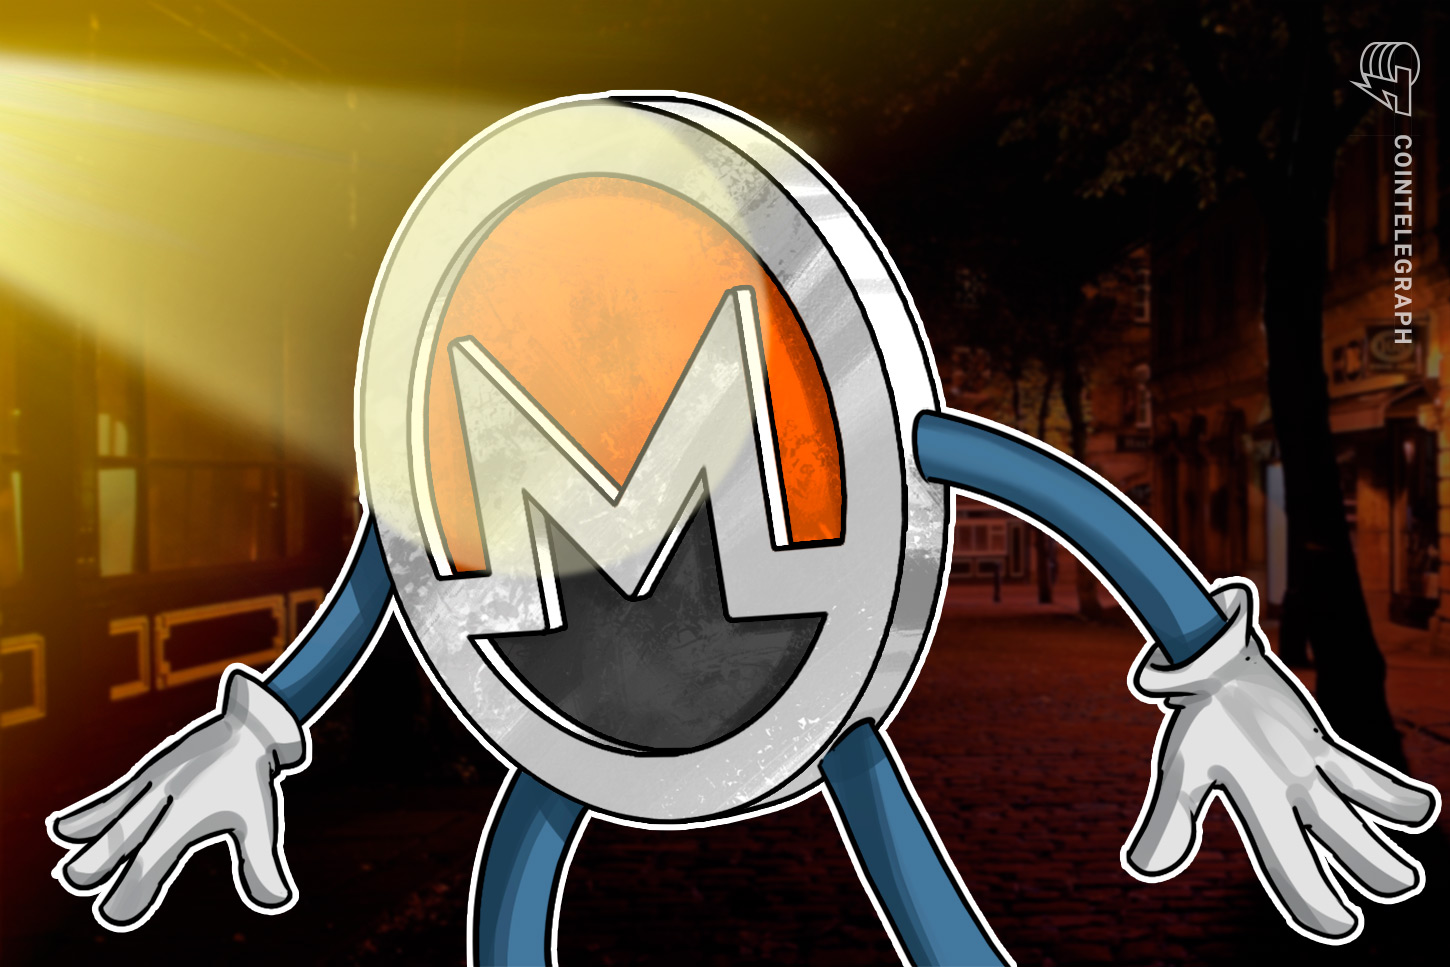 XMR workgroup says IRS ought to examine Monero — not attempt to break it